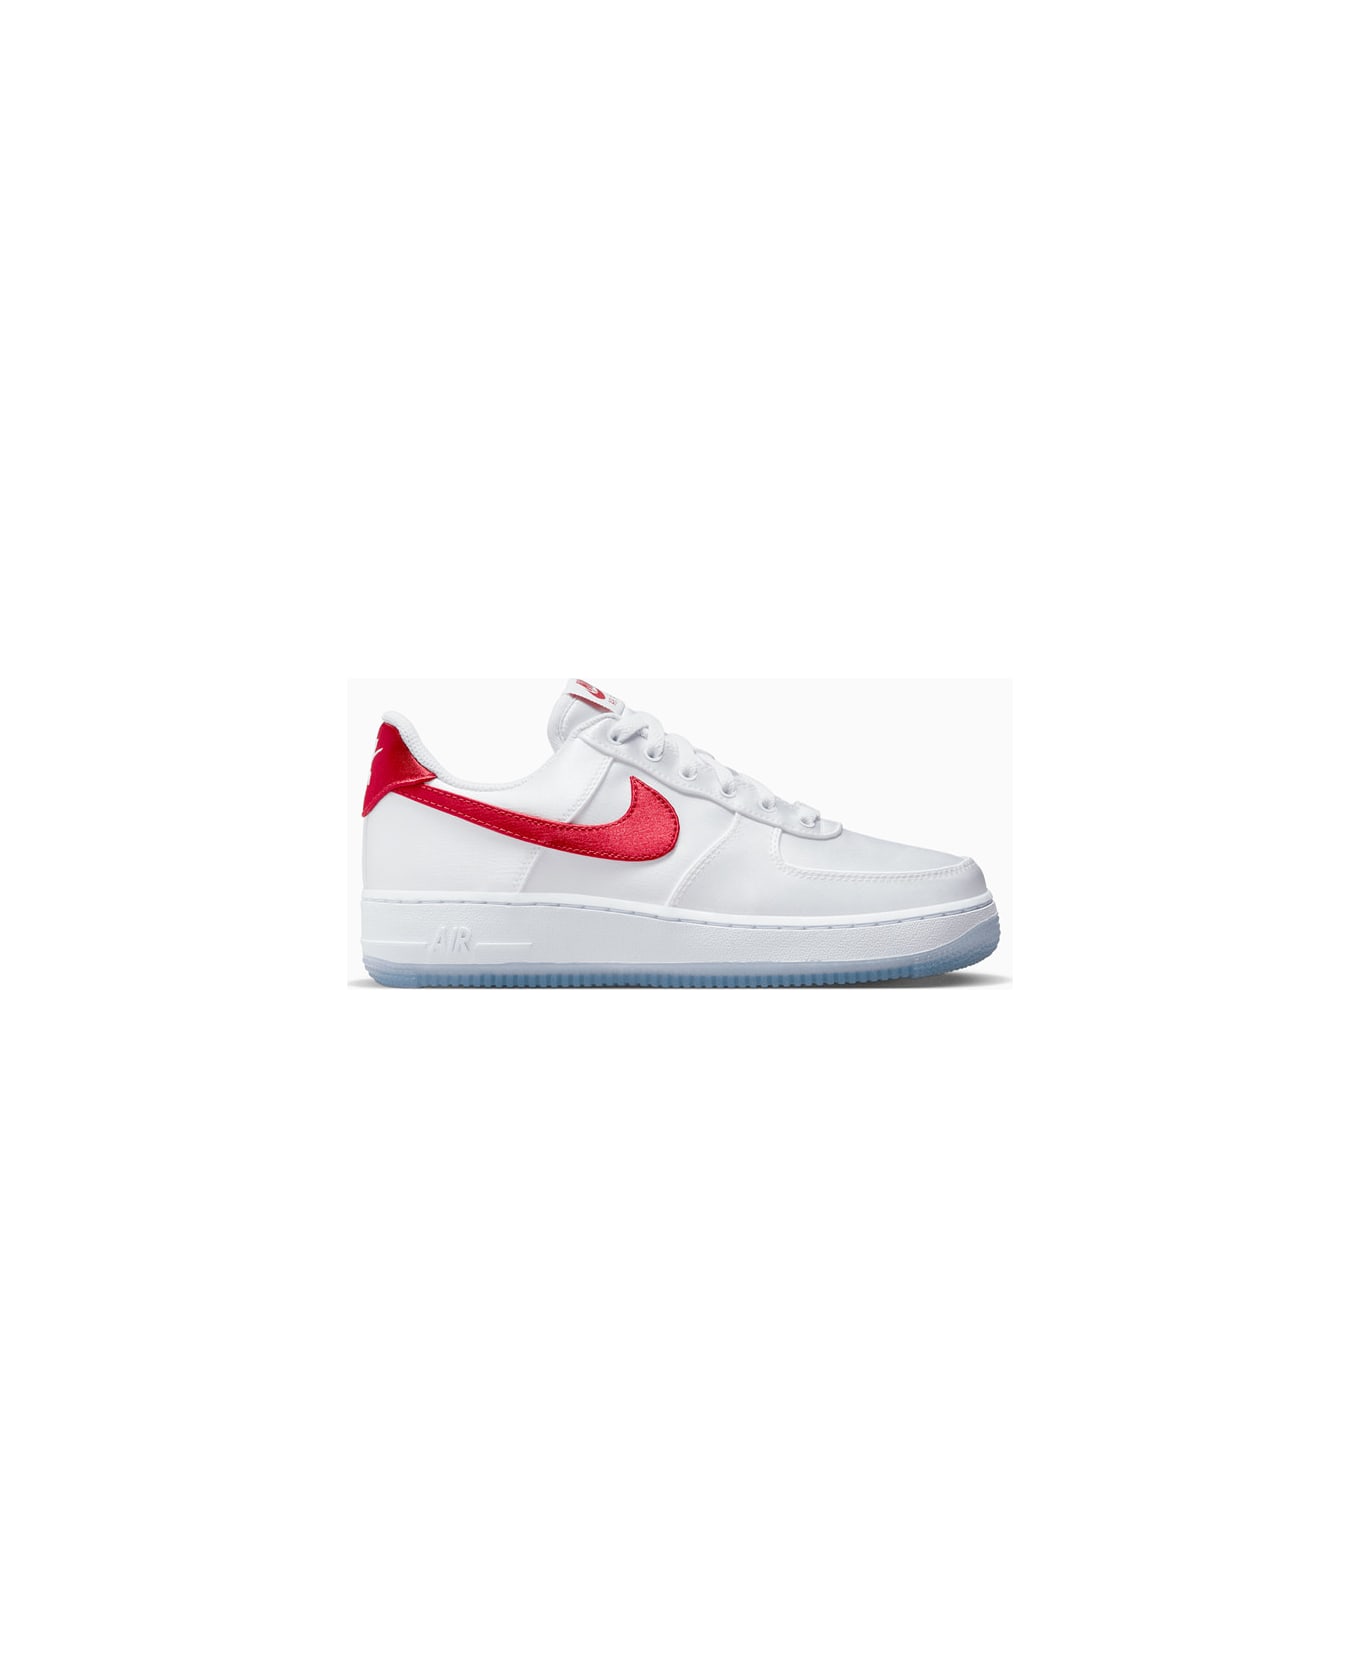 Nike Air Force 1 '07 Ess Snkr Sneakers Dx6541-100 - White スニーカー